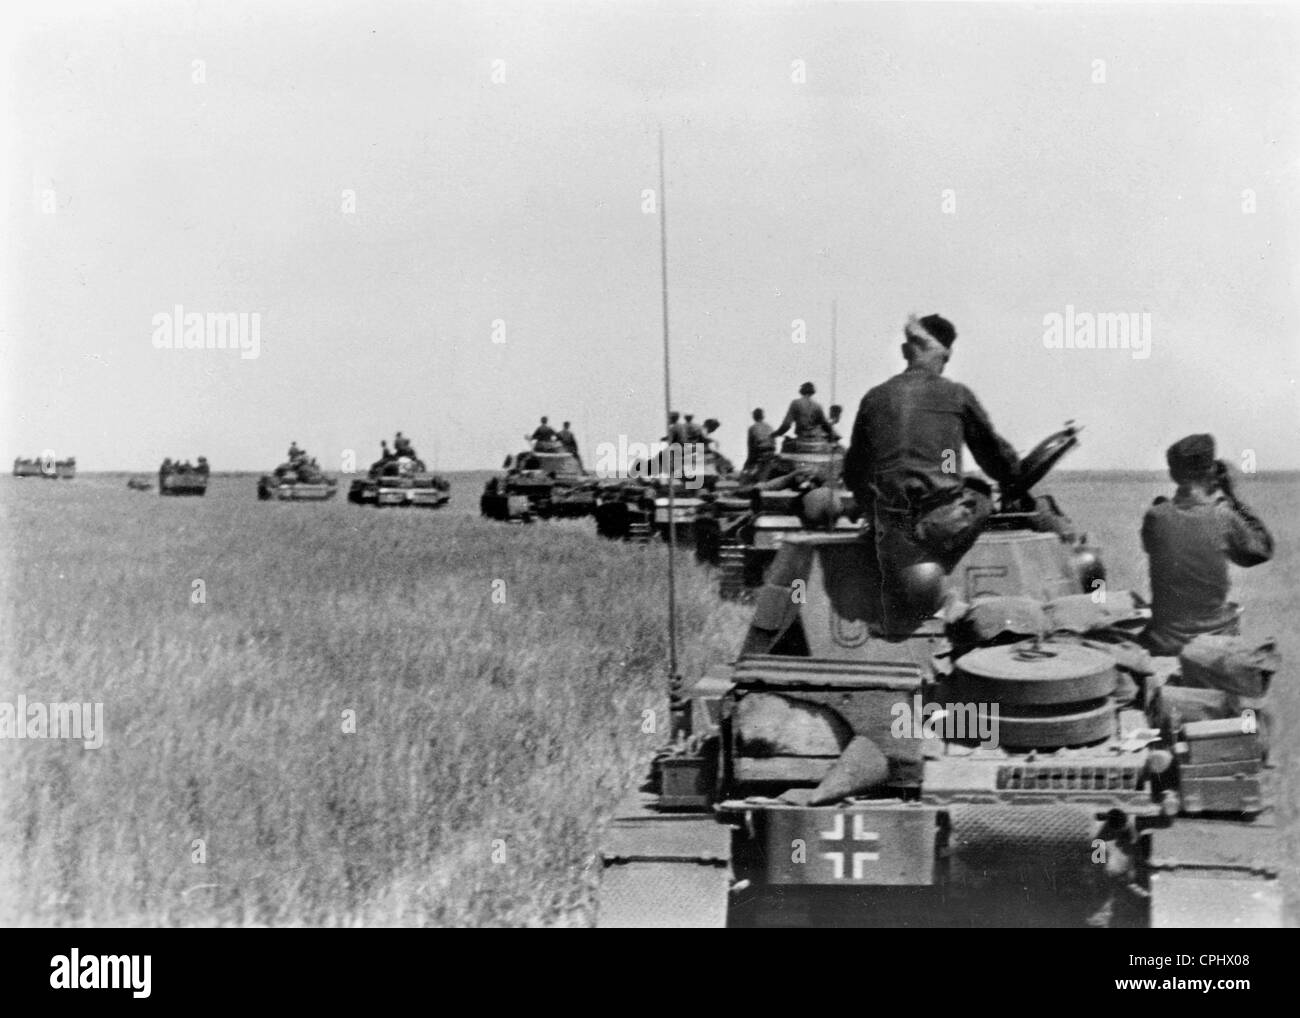 German armored column on the Eastern Front, 1942 Stock Photo